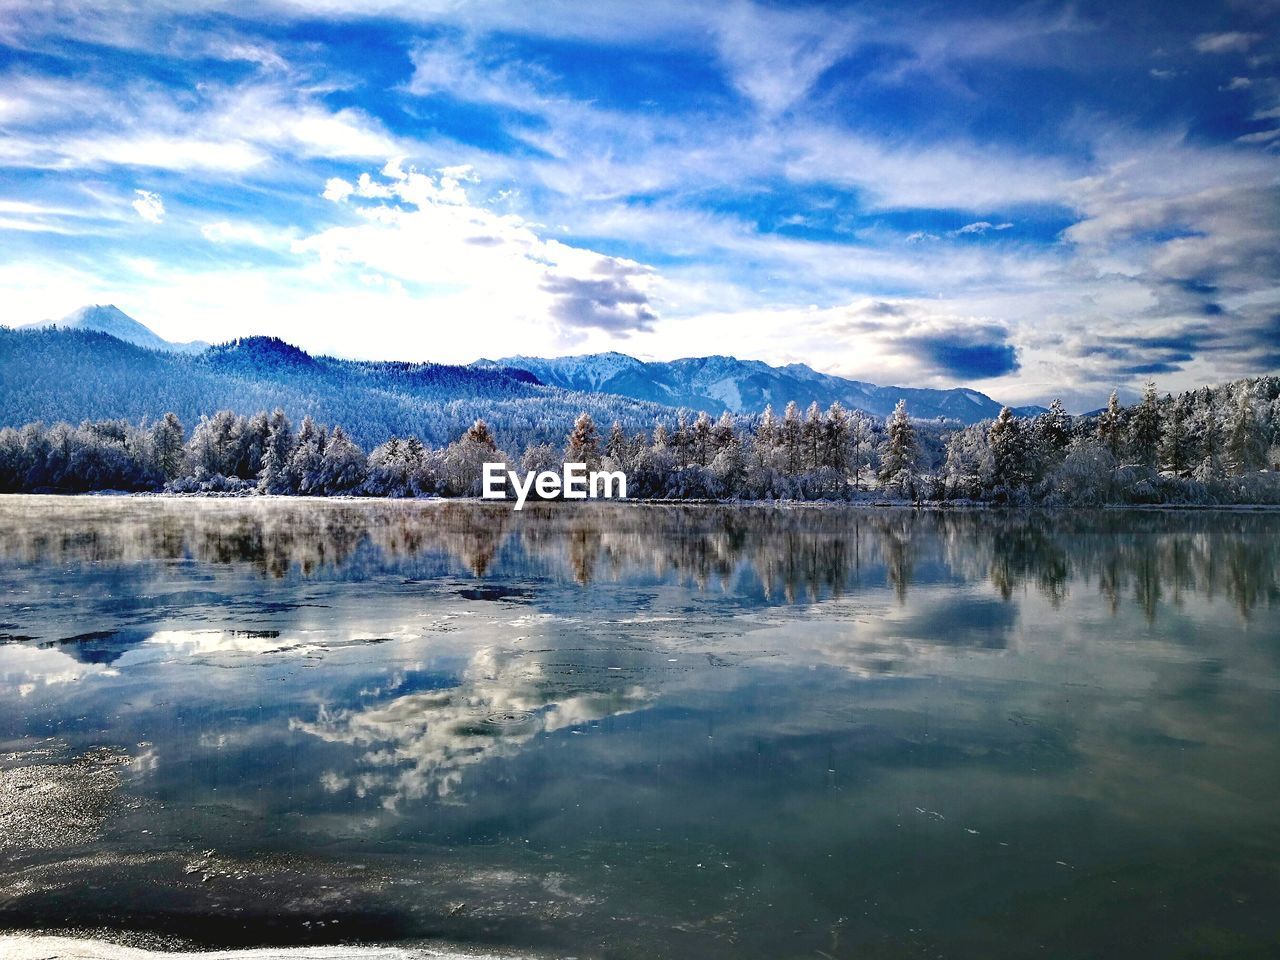 SCENIC VIEW OF LAKE BY SNOW COVERED LANDSCAPE